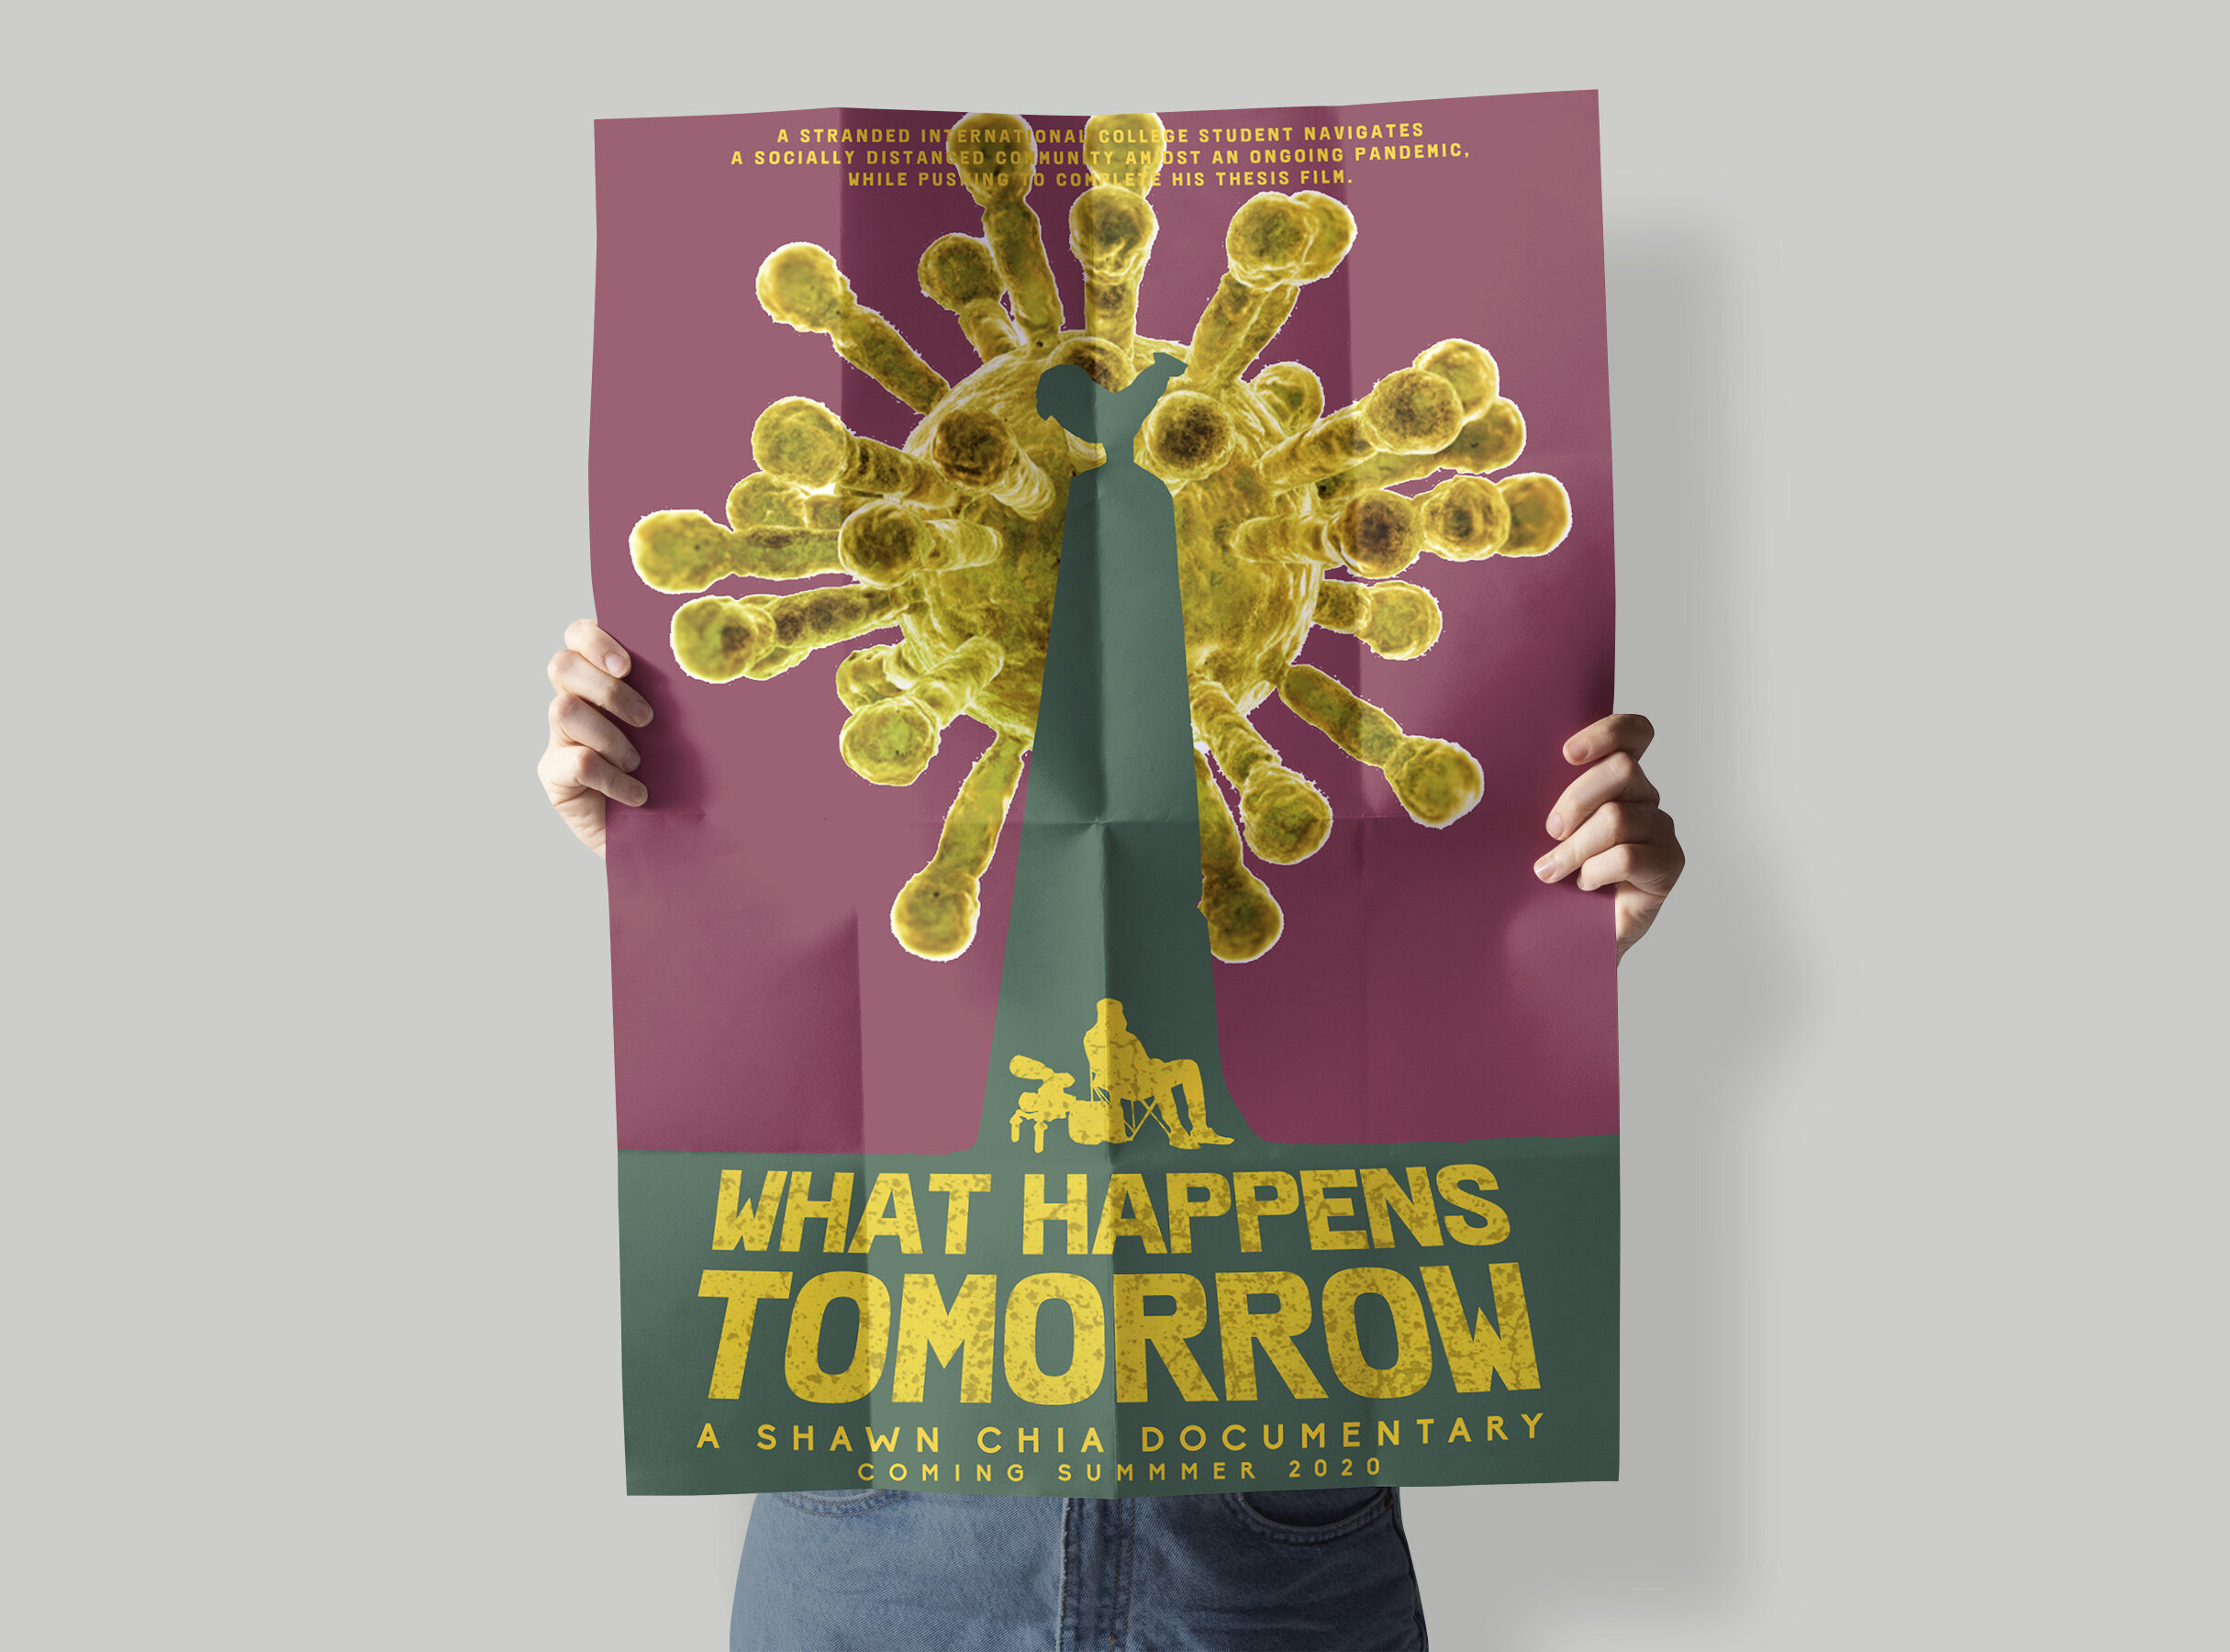 Hands hold up a vibrant film poster.